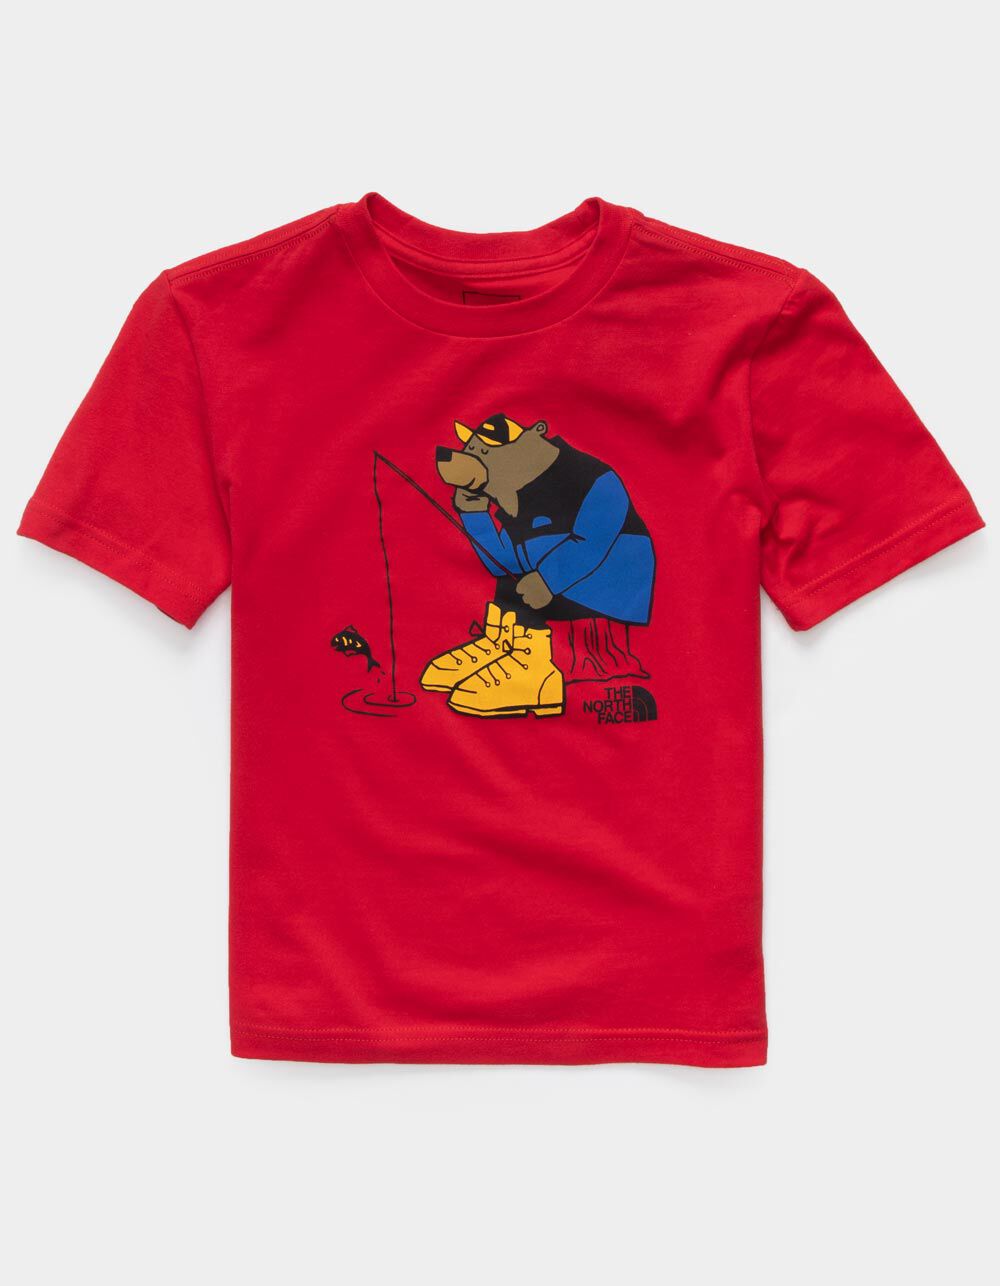 THE NORTH FACE Fishing Bear Little Boys T-Shirt (4-7) - RED